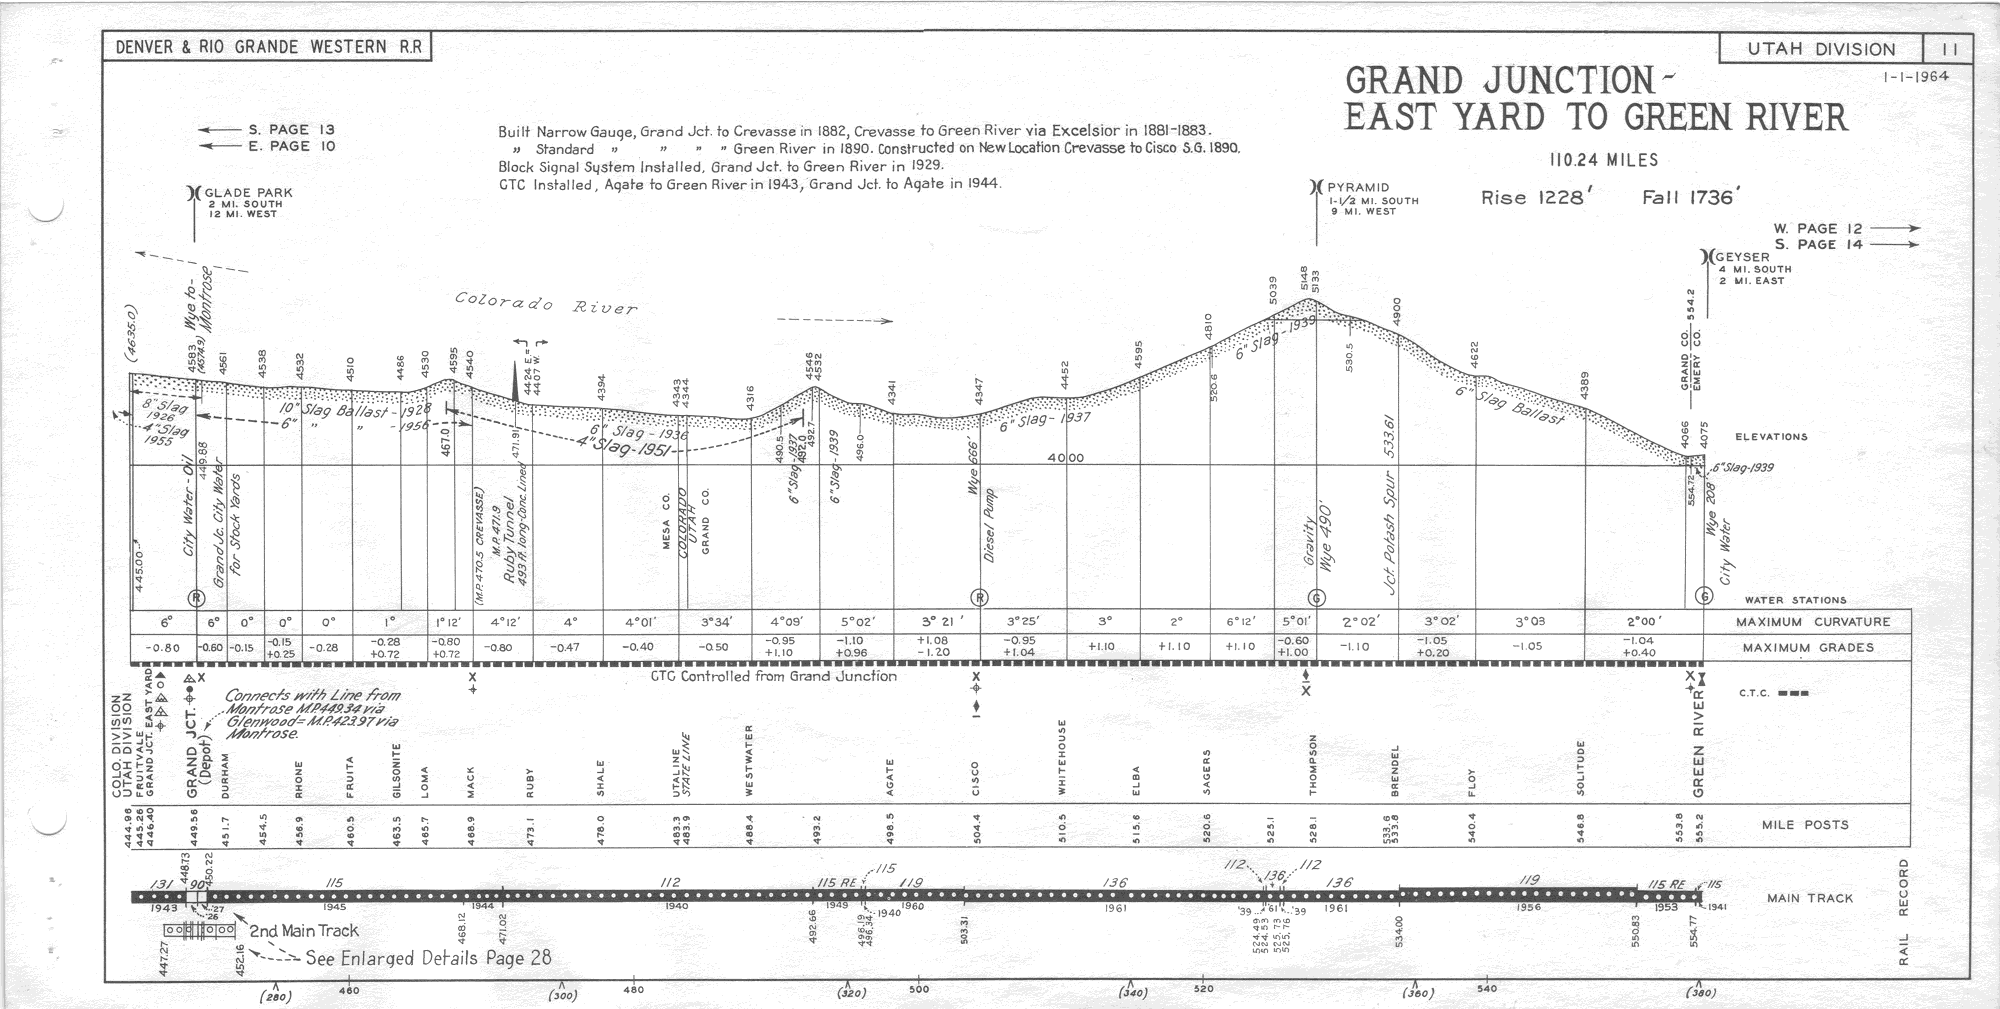 drgw_profile_1964_p11.png